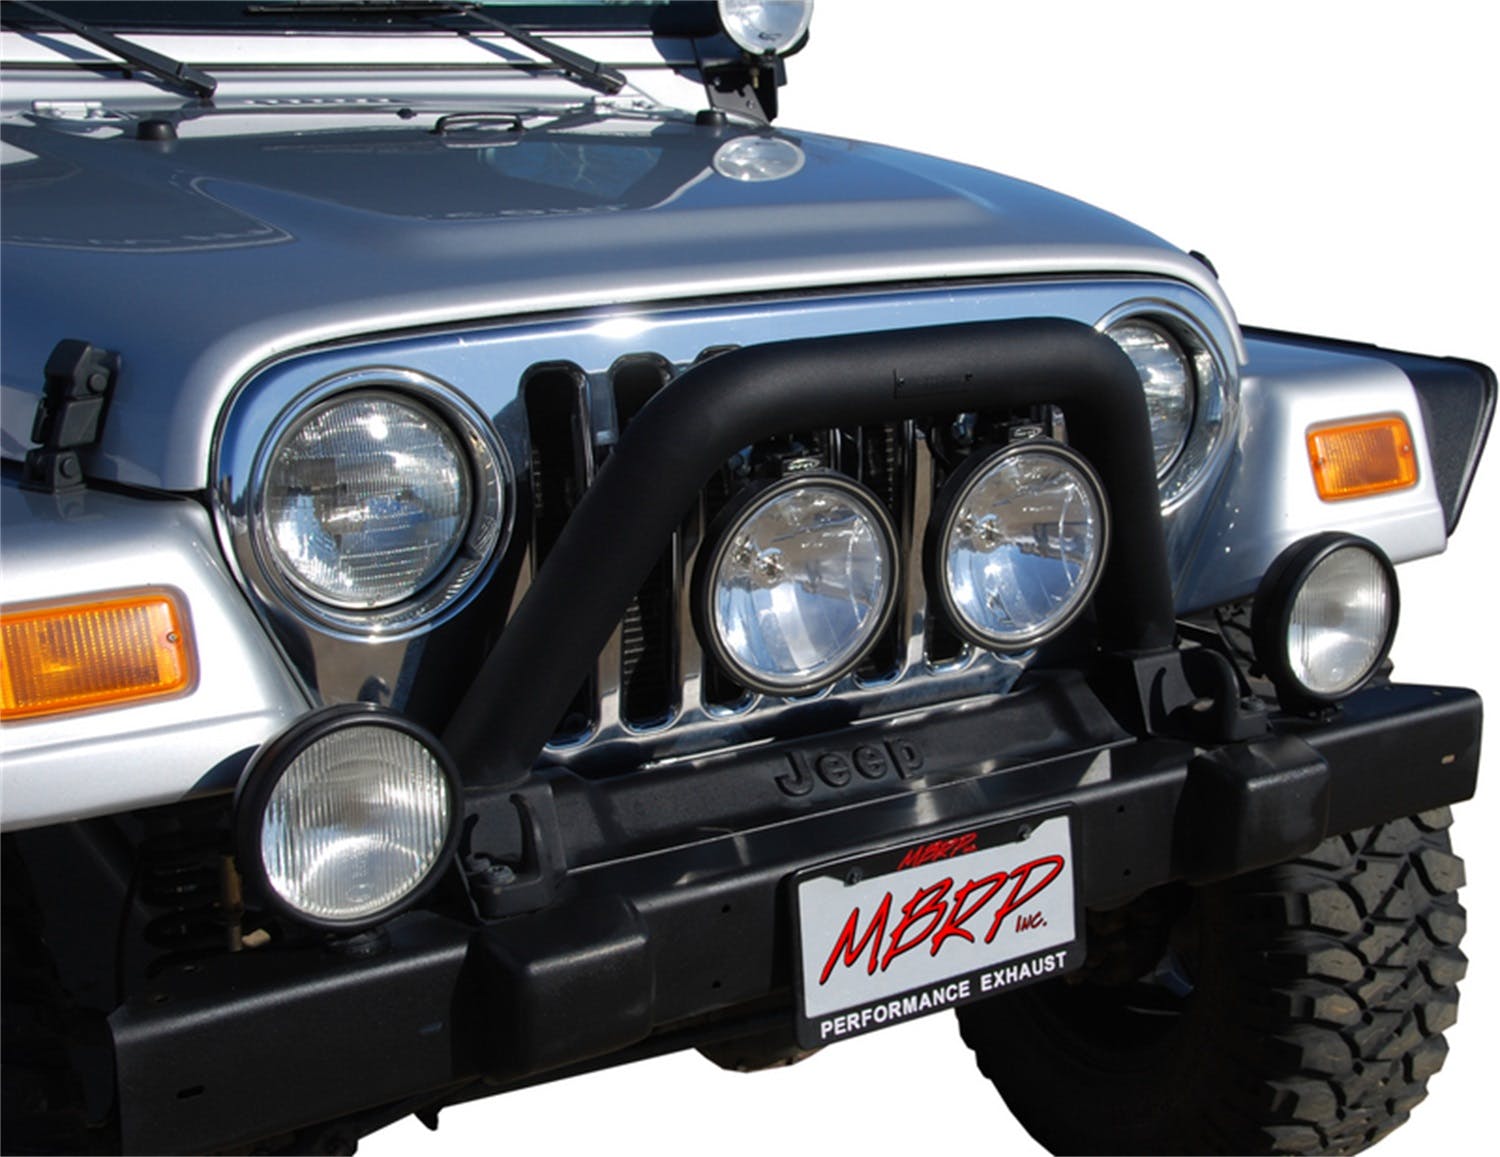 MBRP Exhaust 131086 Front Light Bar/Grill Guard System; Black Coated